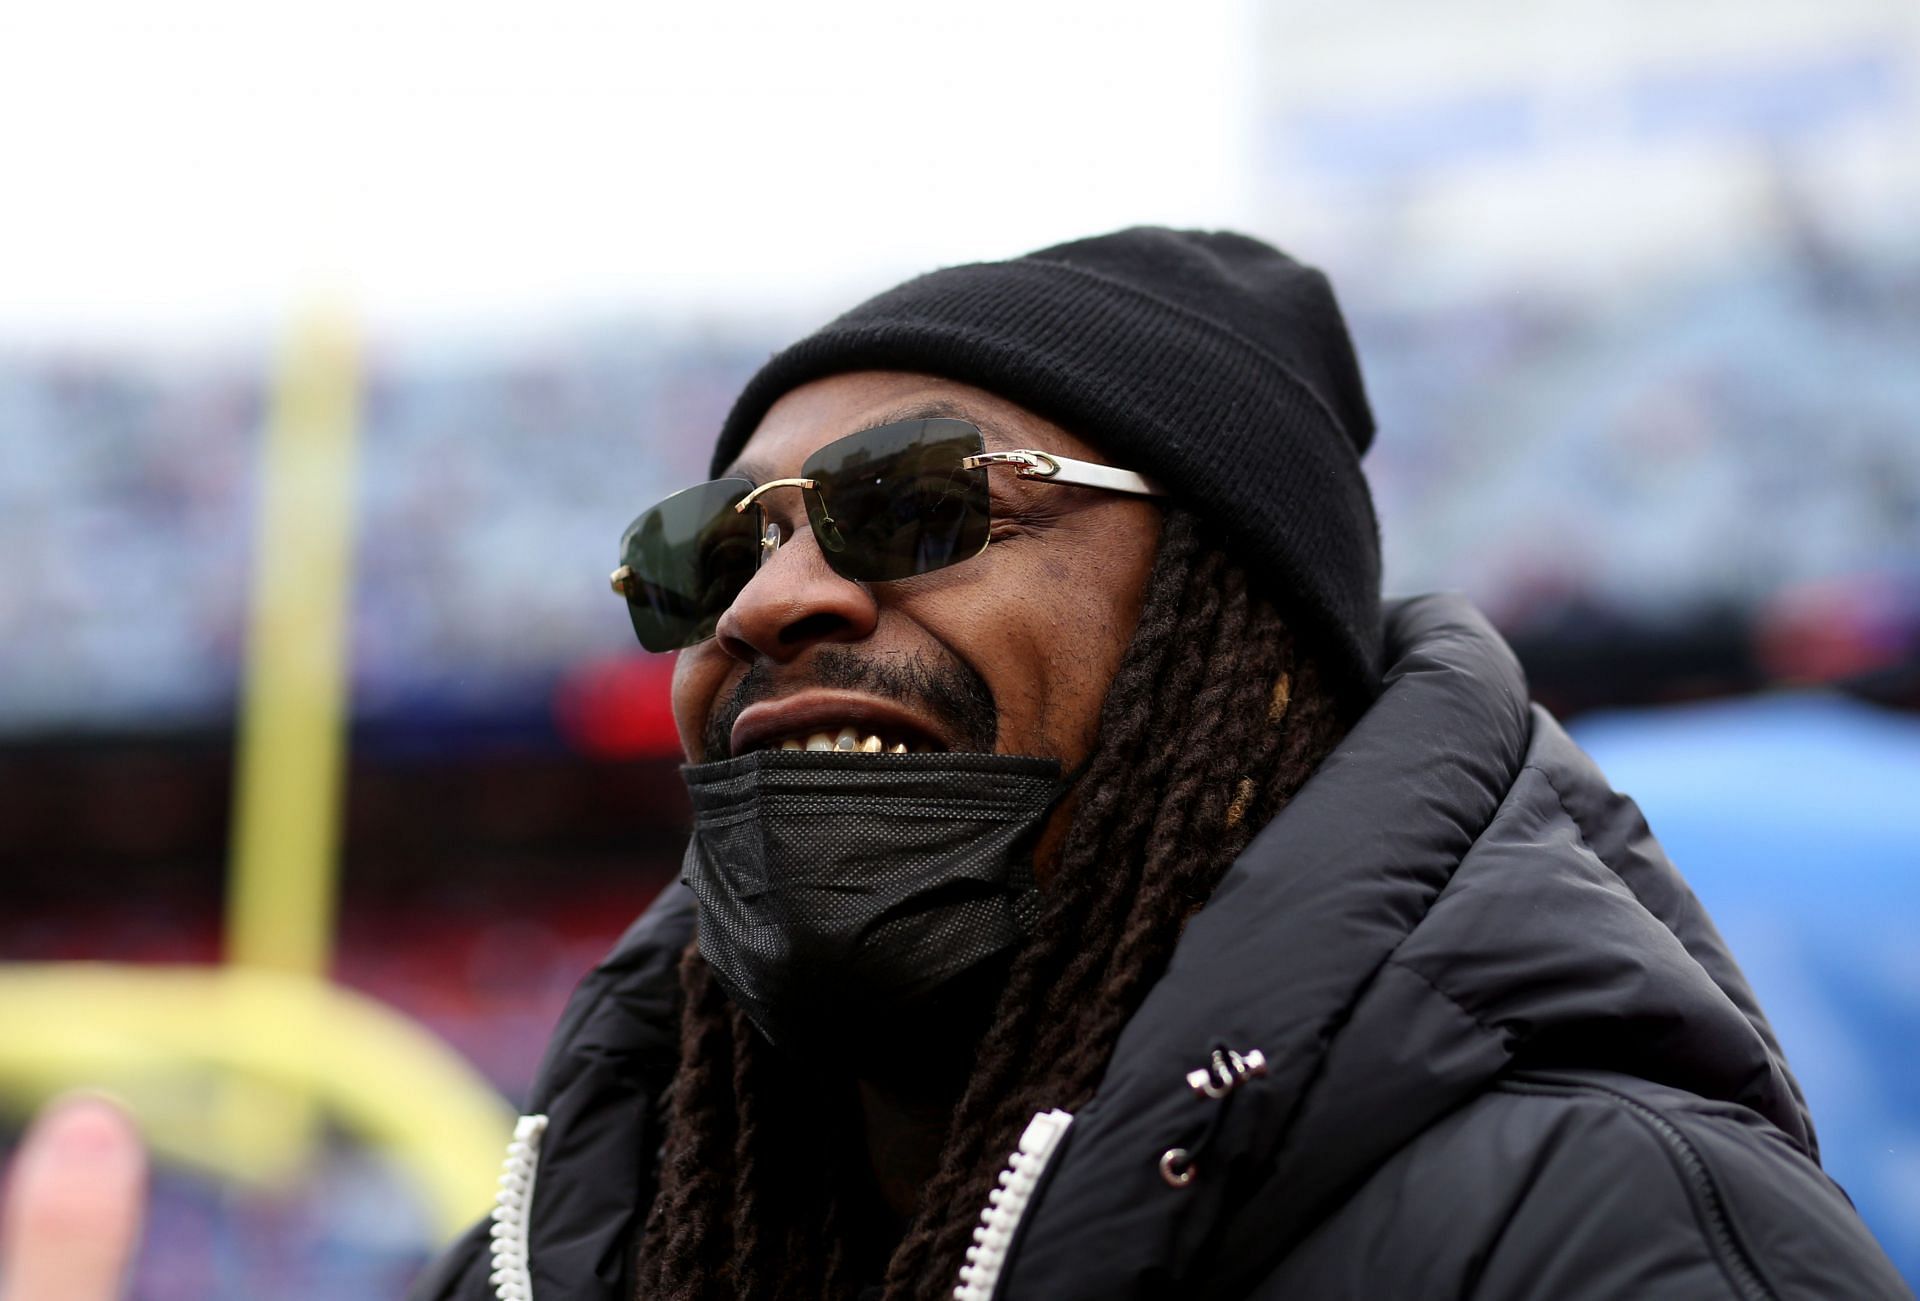 Marshawn Lynch is considered a national treasure after his NFL career